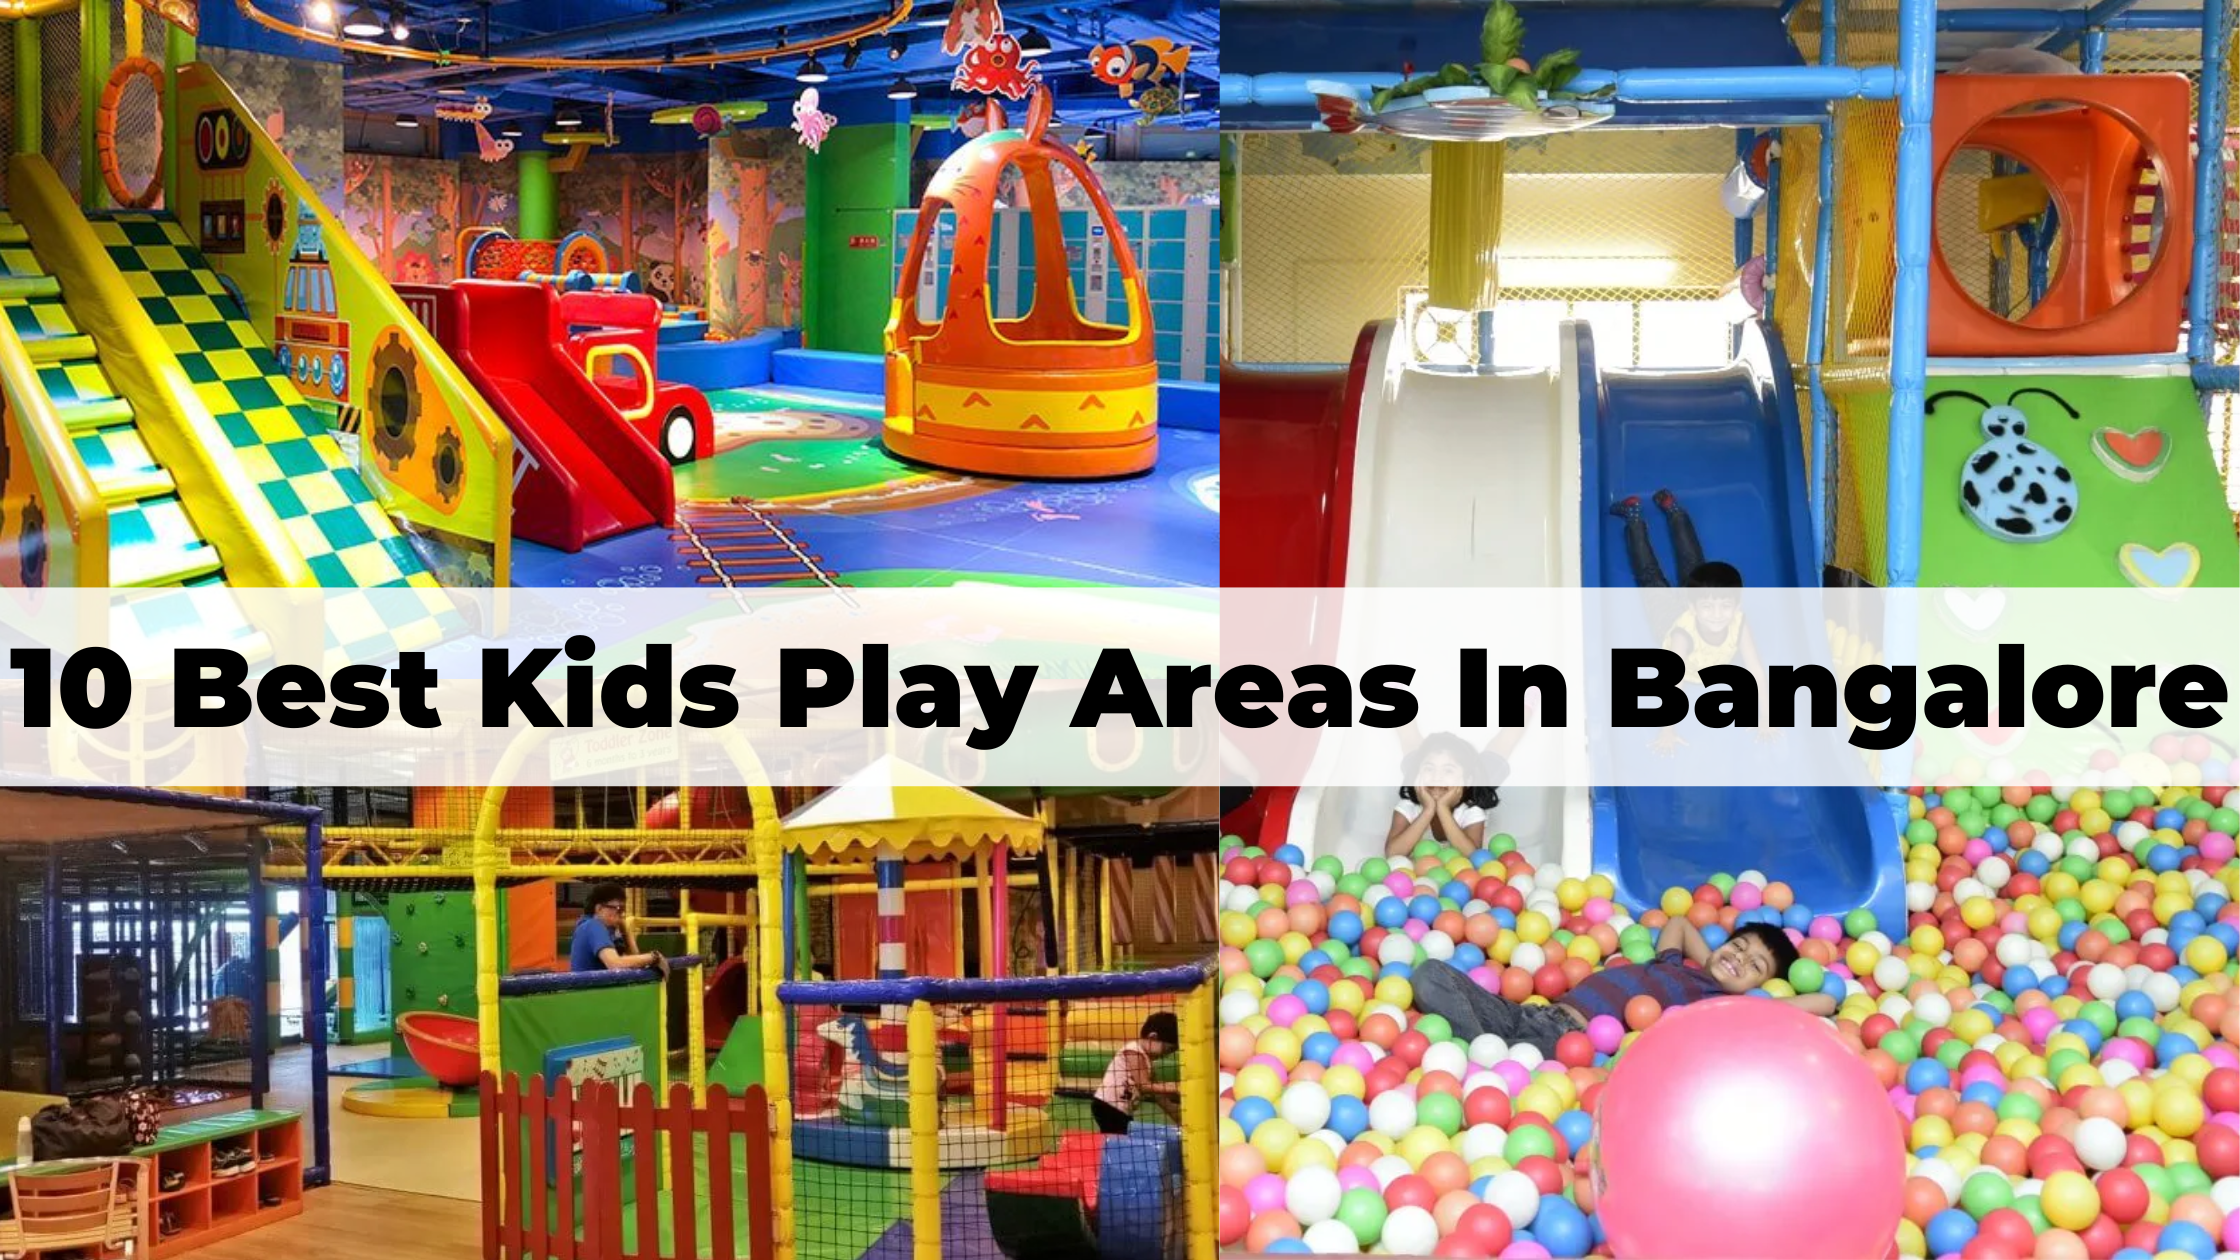 10 Best Kids Play Areas in Bangalore | BeWise